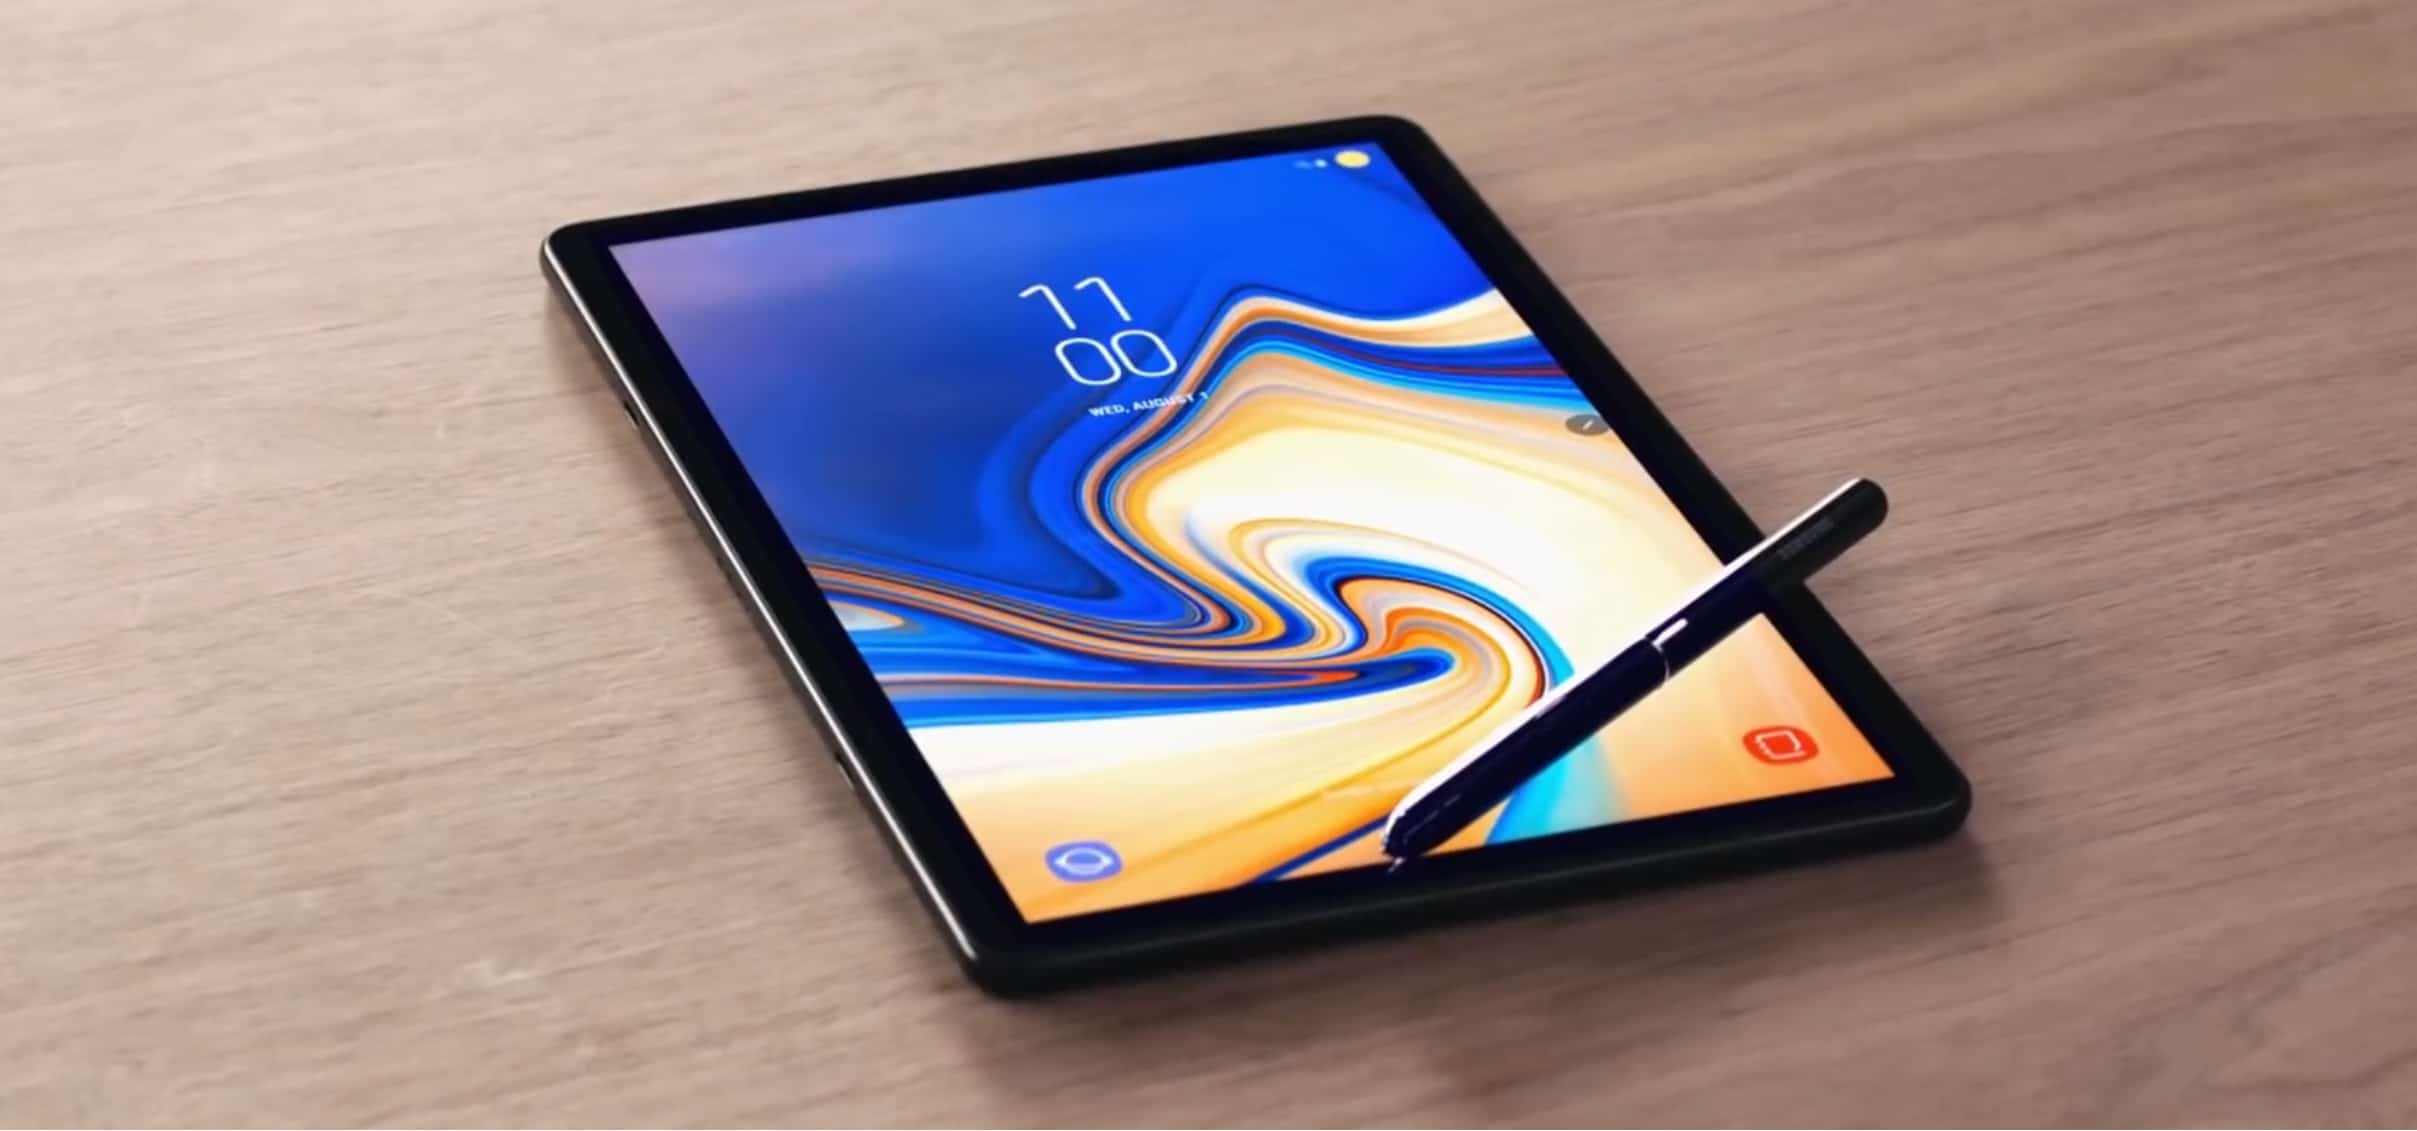 The Galaxy Tab S4 is clearly designed to take on the 10.5-inch iPad Pro.